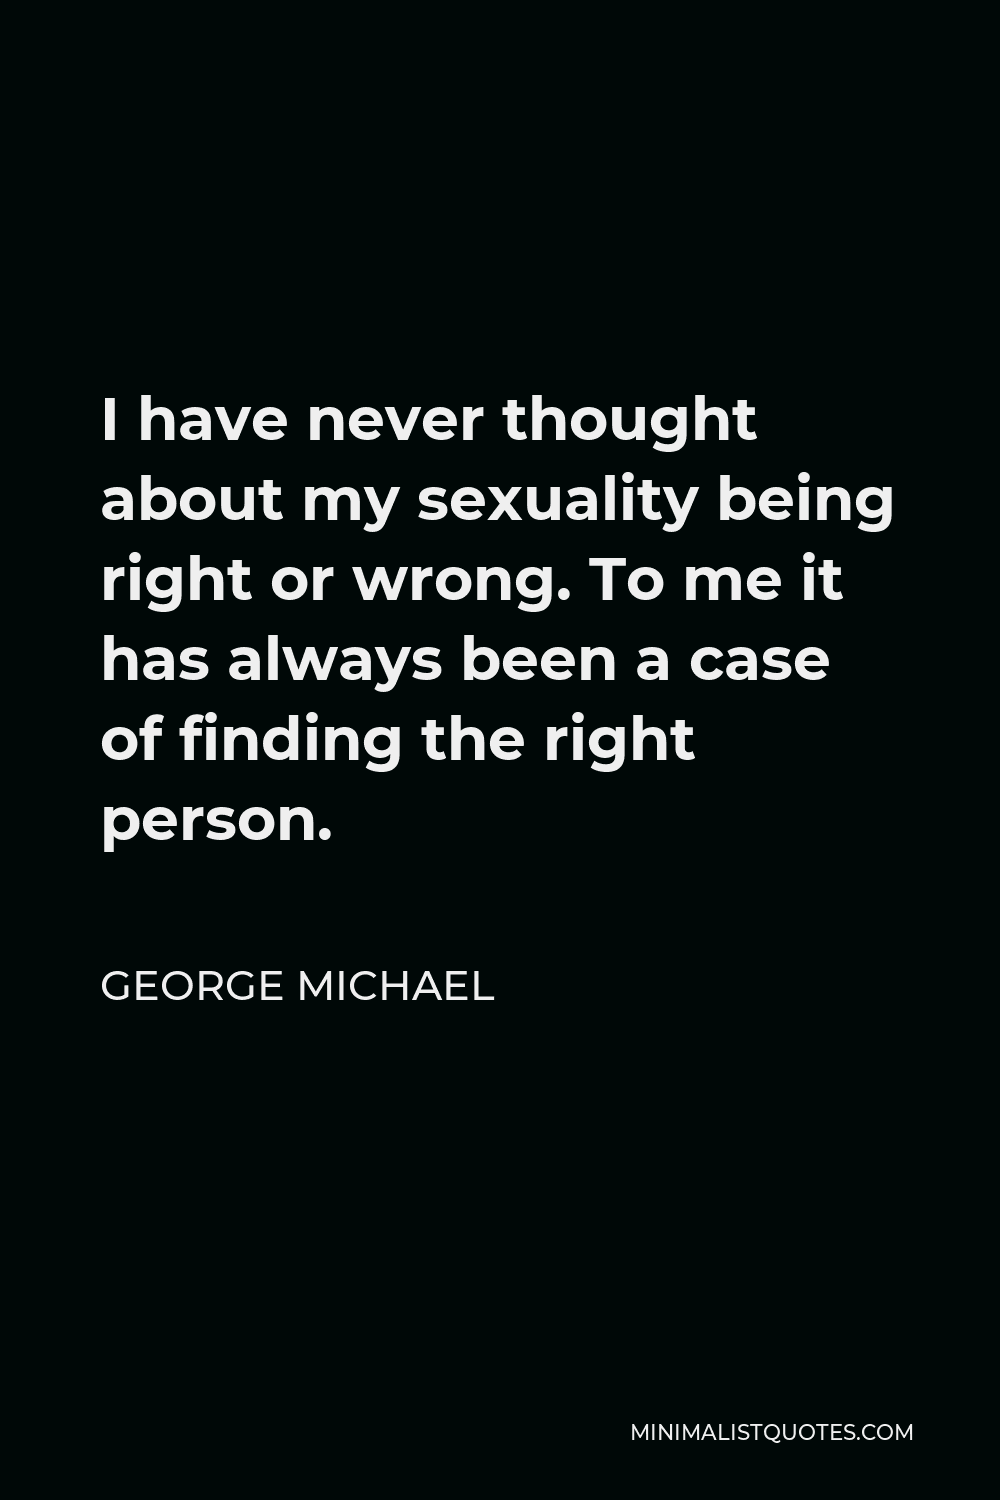 George Michael Quote - I have never thought about my sexuality being right or wrong. To me it has always been a case of finding the right person.